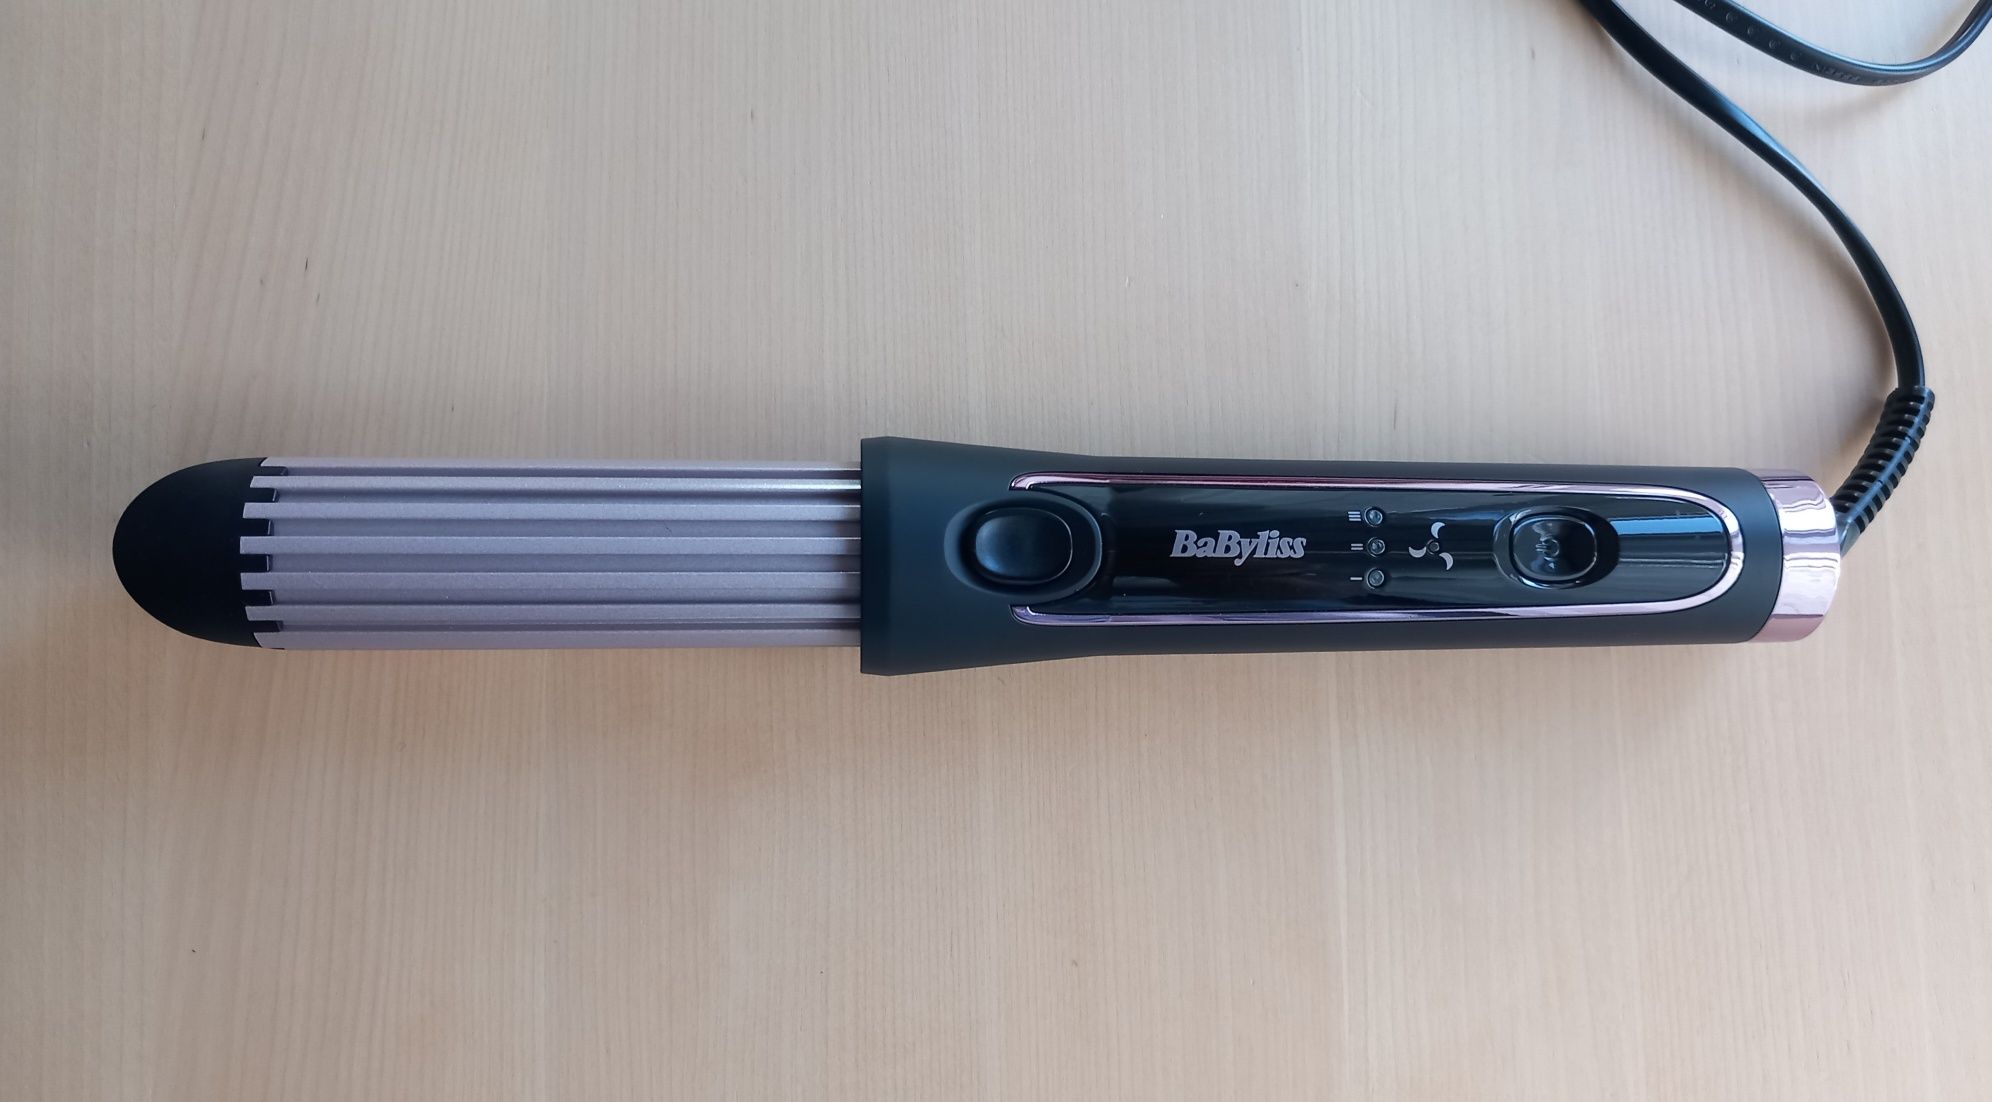 Маша за коса BaByliss C112E Curl Syler Luxe, 36 мм